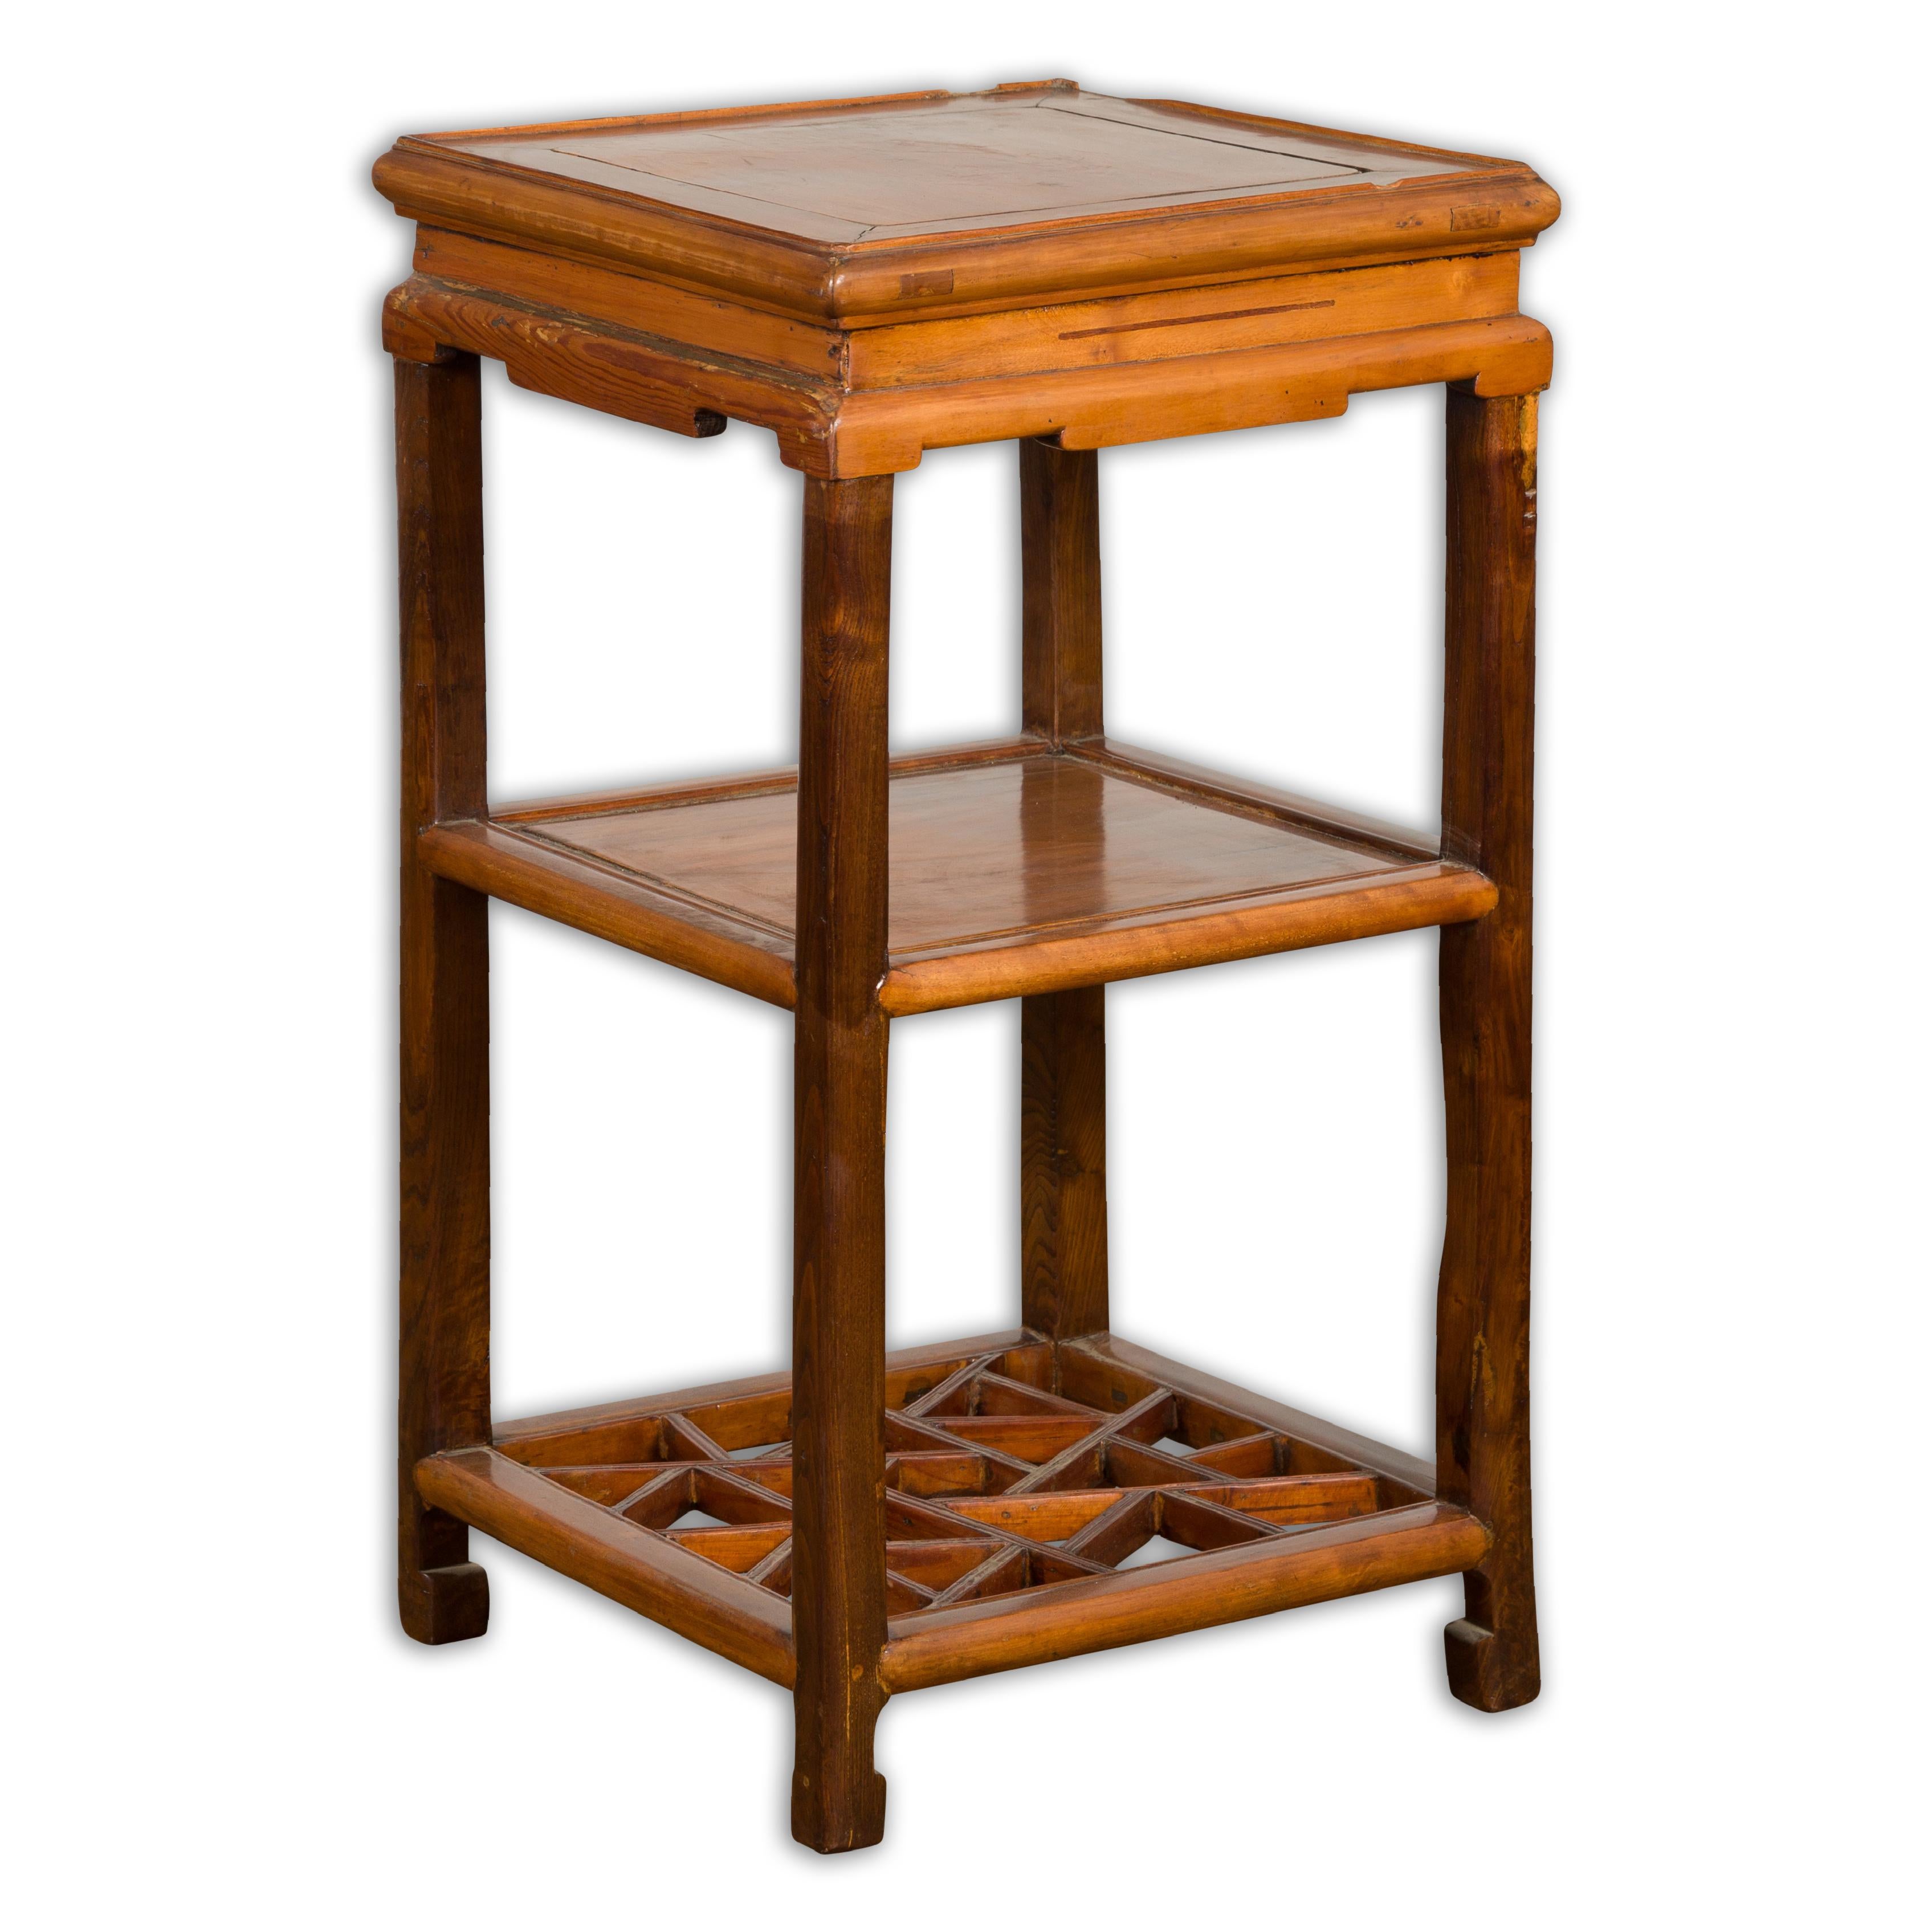 Late Qing Dynasty Side Table with Low Geometric Style Shelf For Sale 8